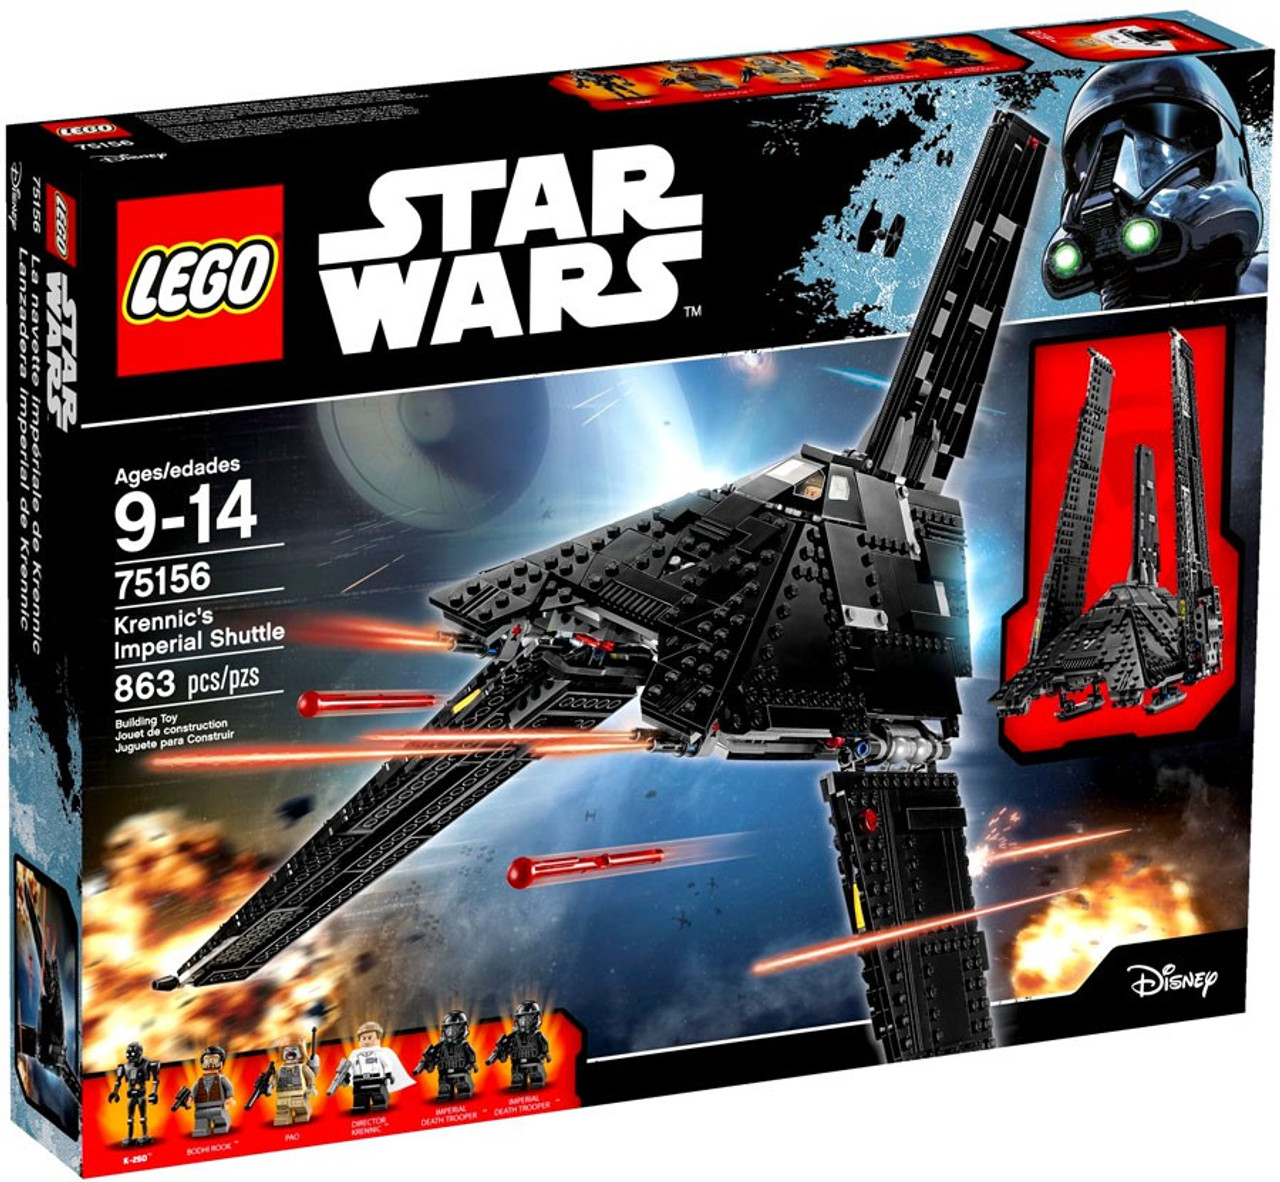 imperial lego sets